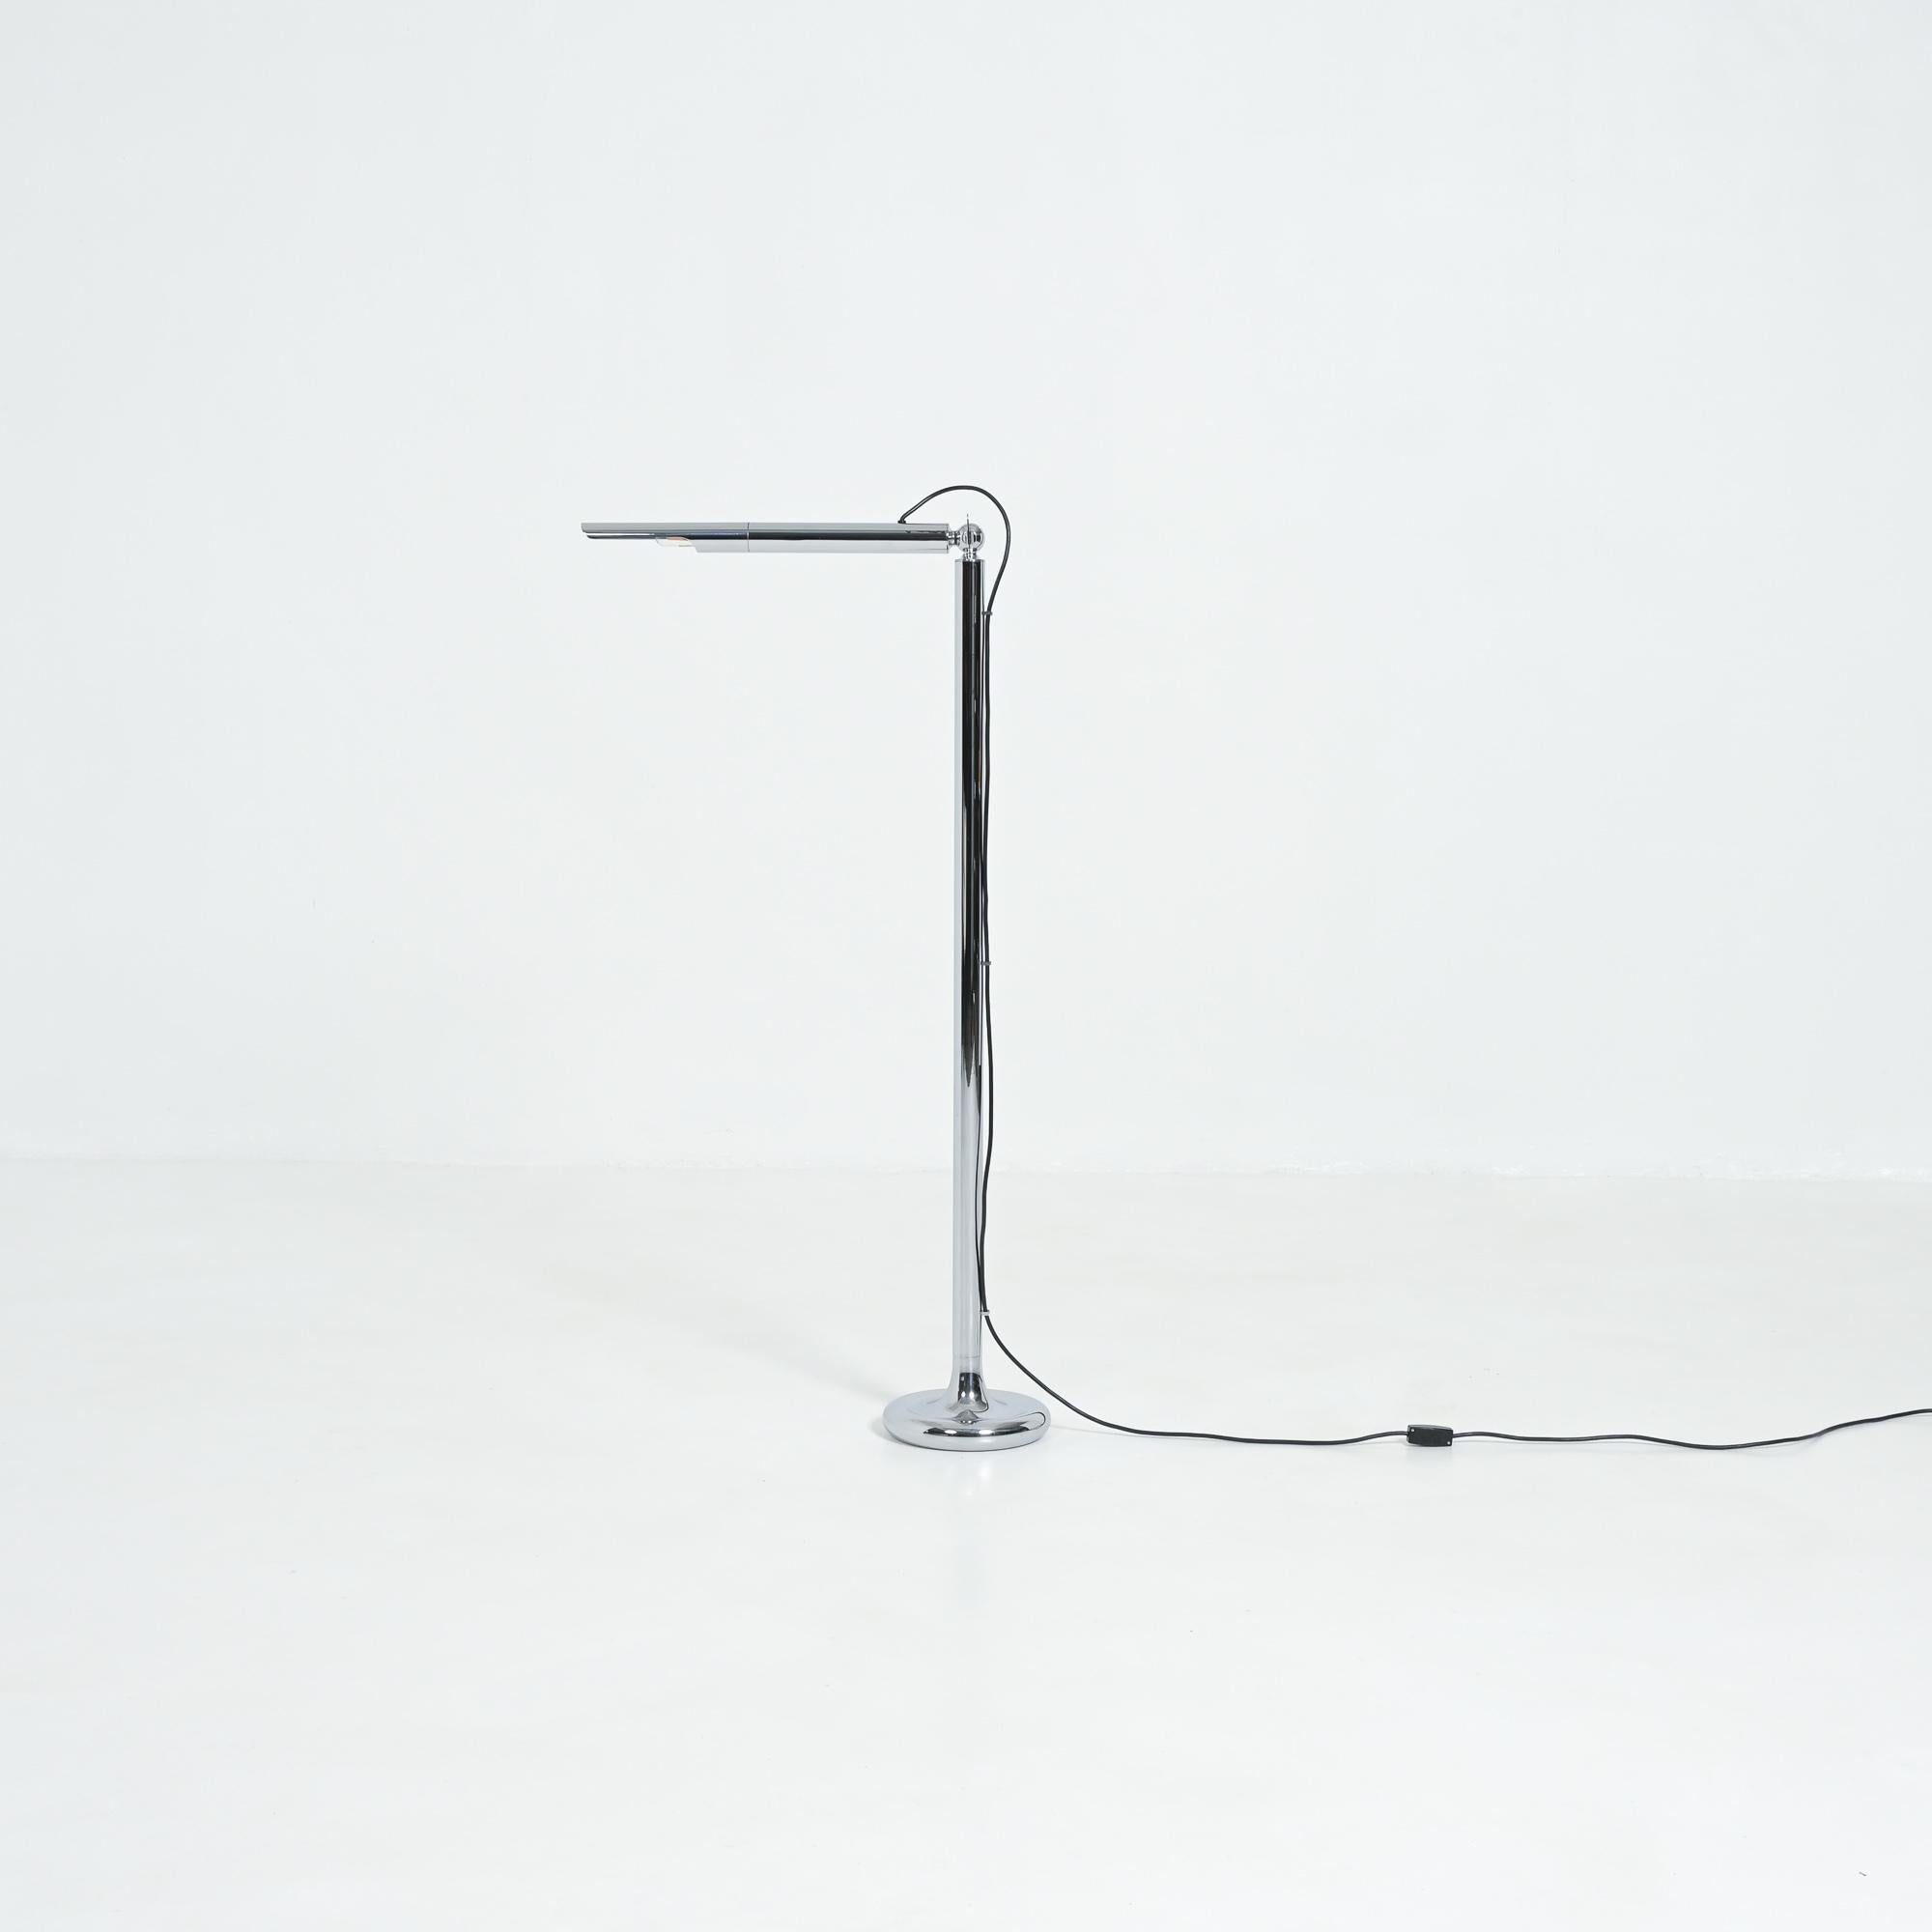 The floor lamp Light Pole was designed by Ingo Maurer in 1967 for Design M.
This lamp is part of the first collection designed by Ingo Maurer for his own company Design M.
The base, the axis and the directional reflector are all made of chromed